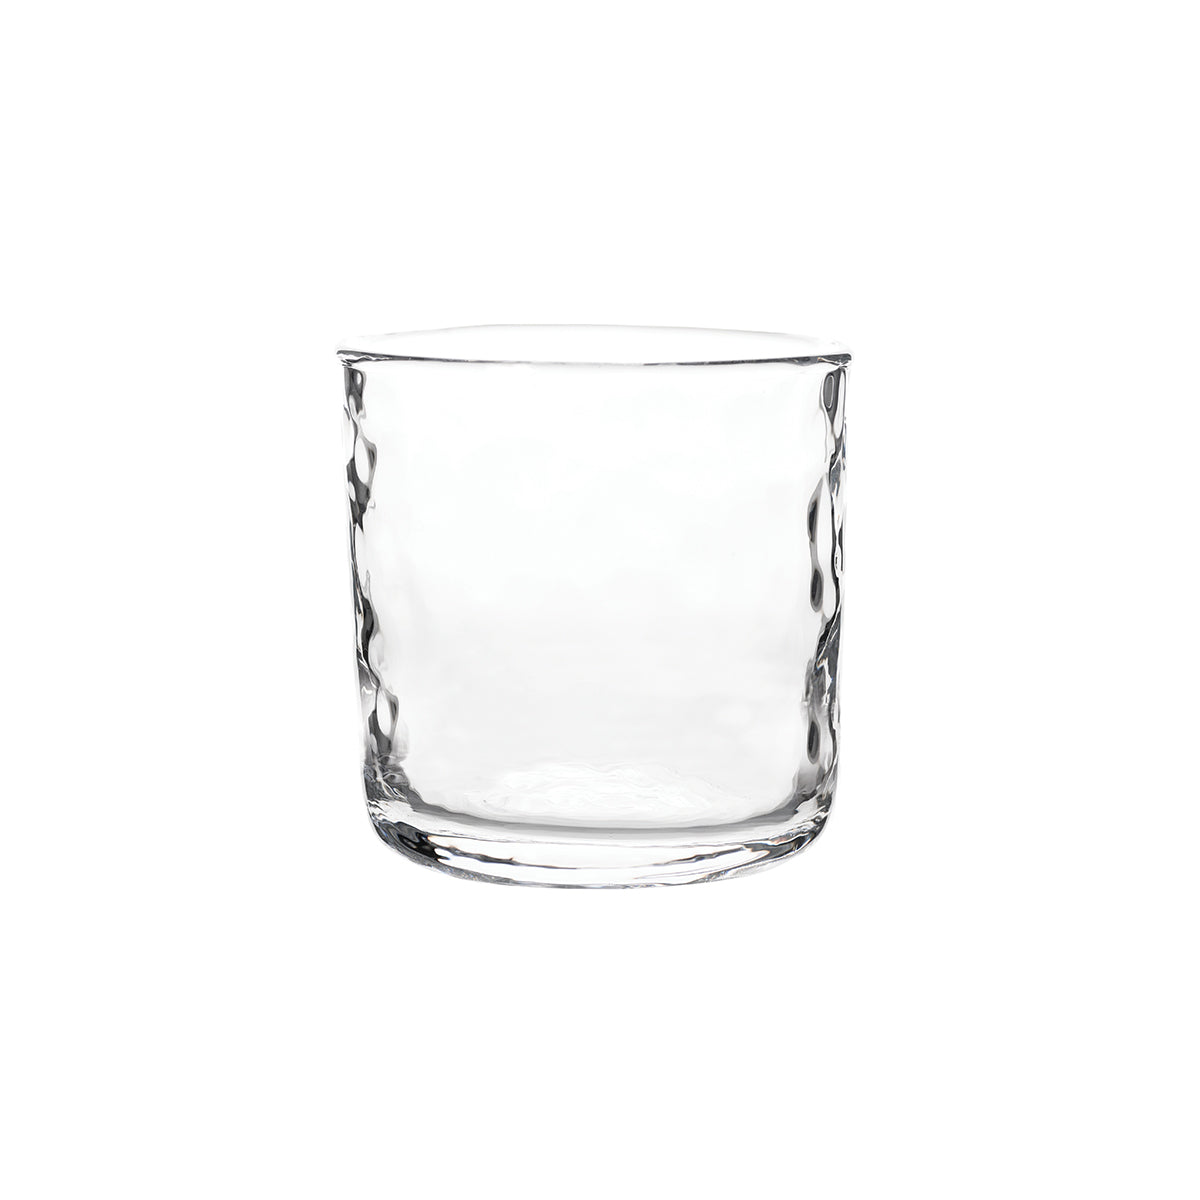 Subtly shimmering and textural this satisfyingly sturdy mouth-blown glass is a worthy vessel for any stiff drink.